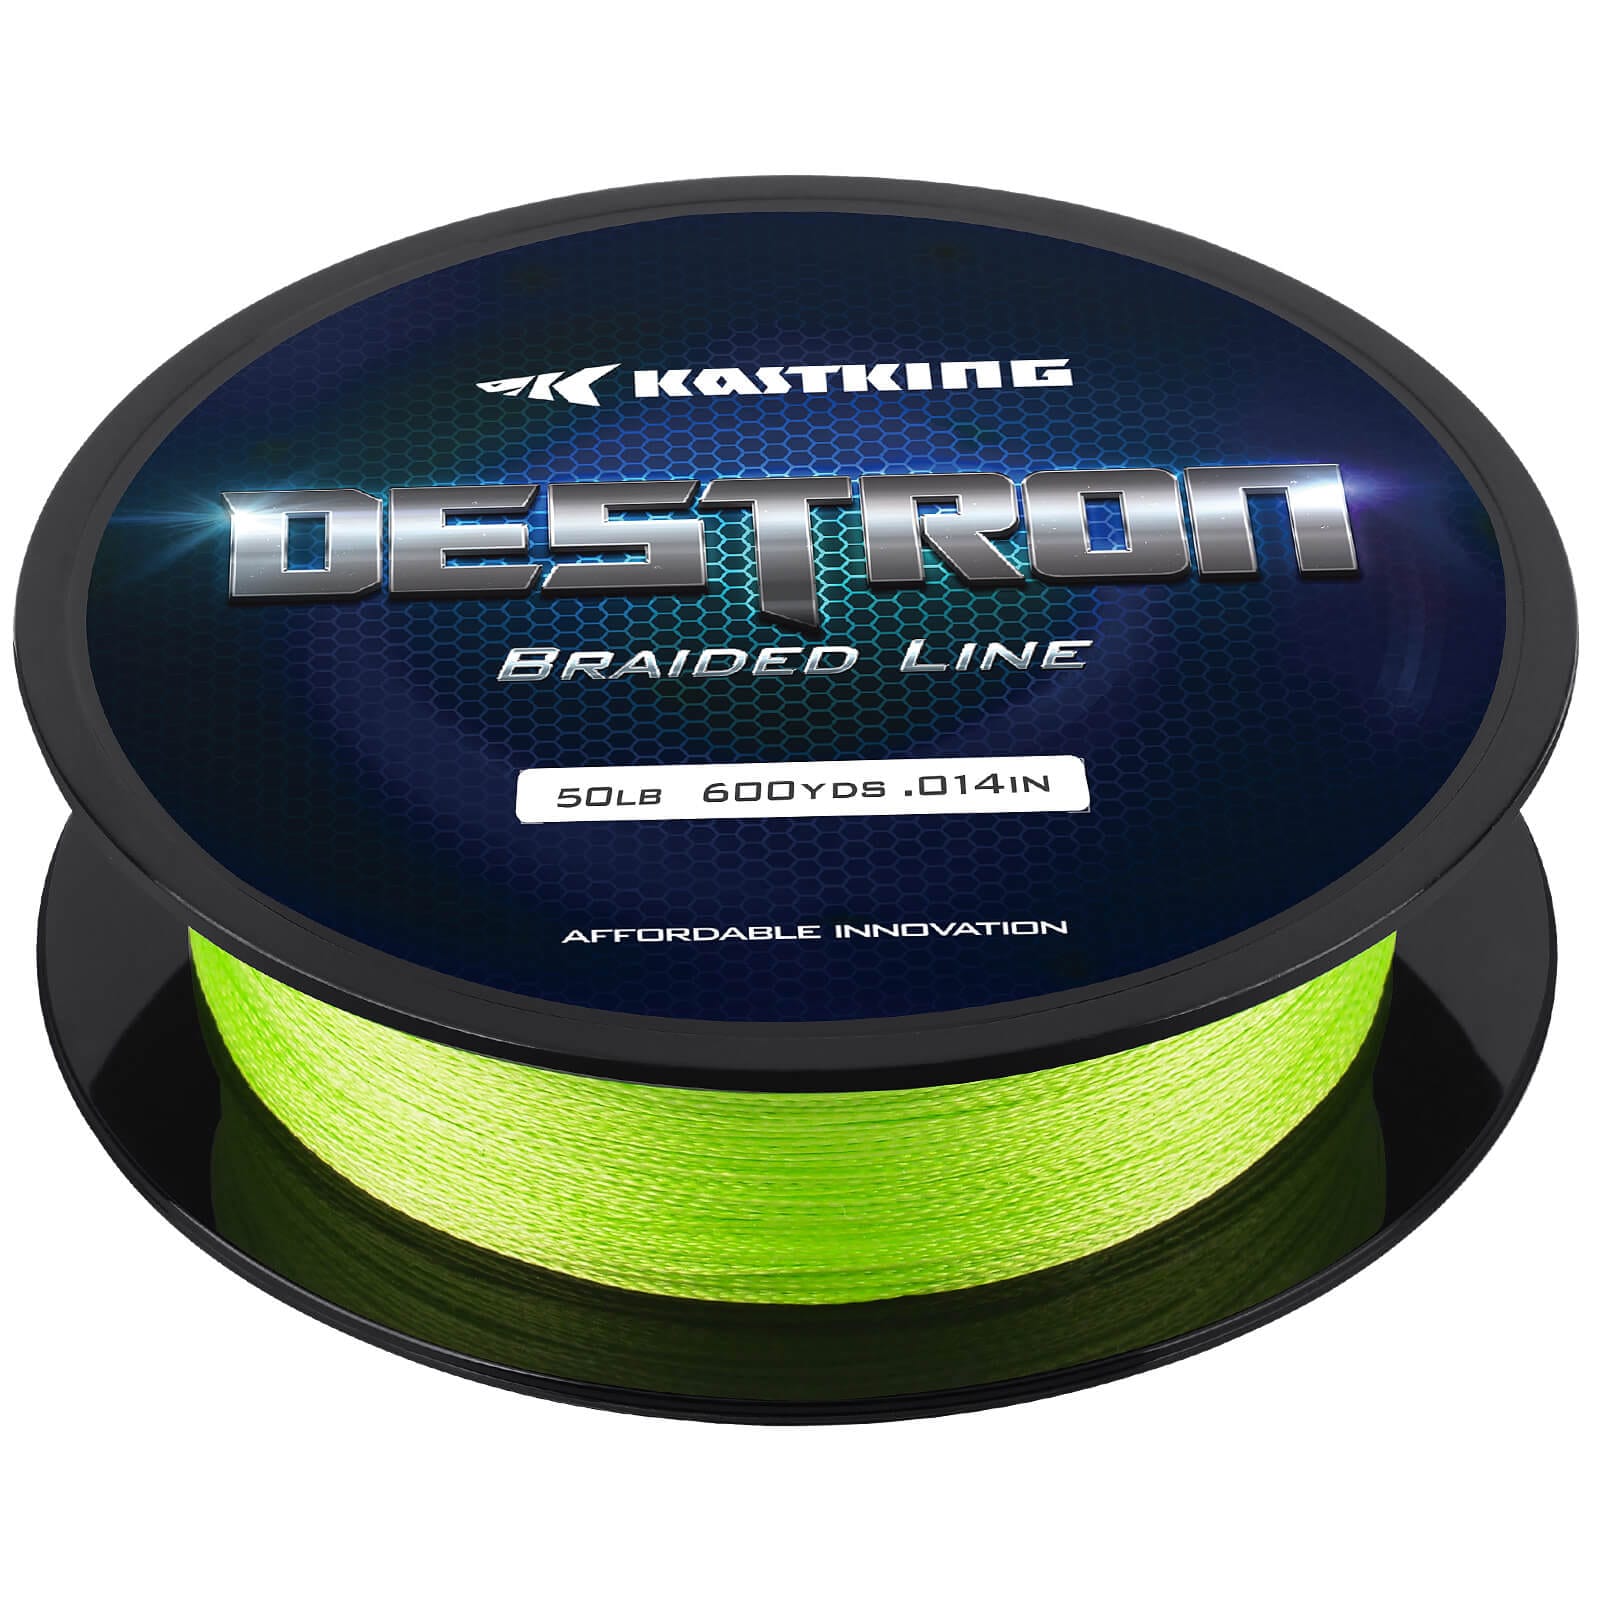 KastKing Brand PE Braided Fishing Line Fishing Line Durable, Multifilament,  Strong Abrasion, 6 80LB, 4 Strands, 300M Length, 327Yds Weight 230822 From  Ren06, $17.34